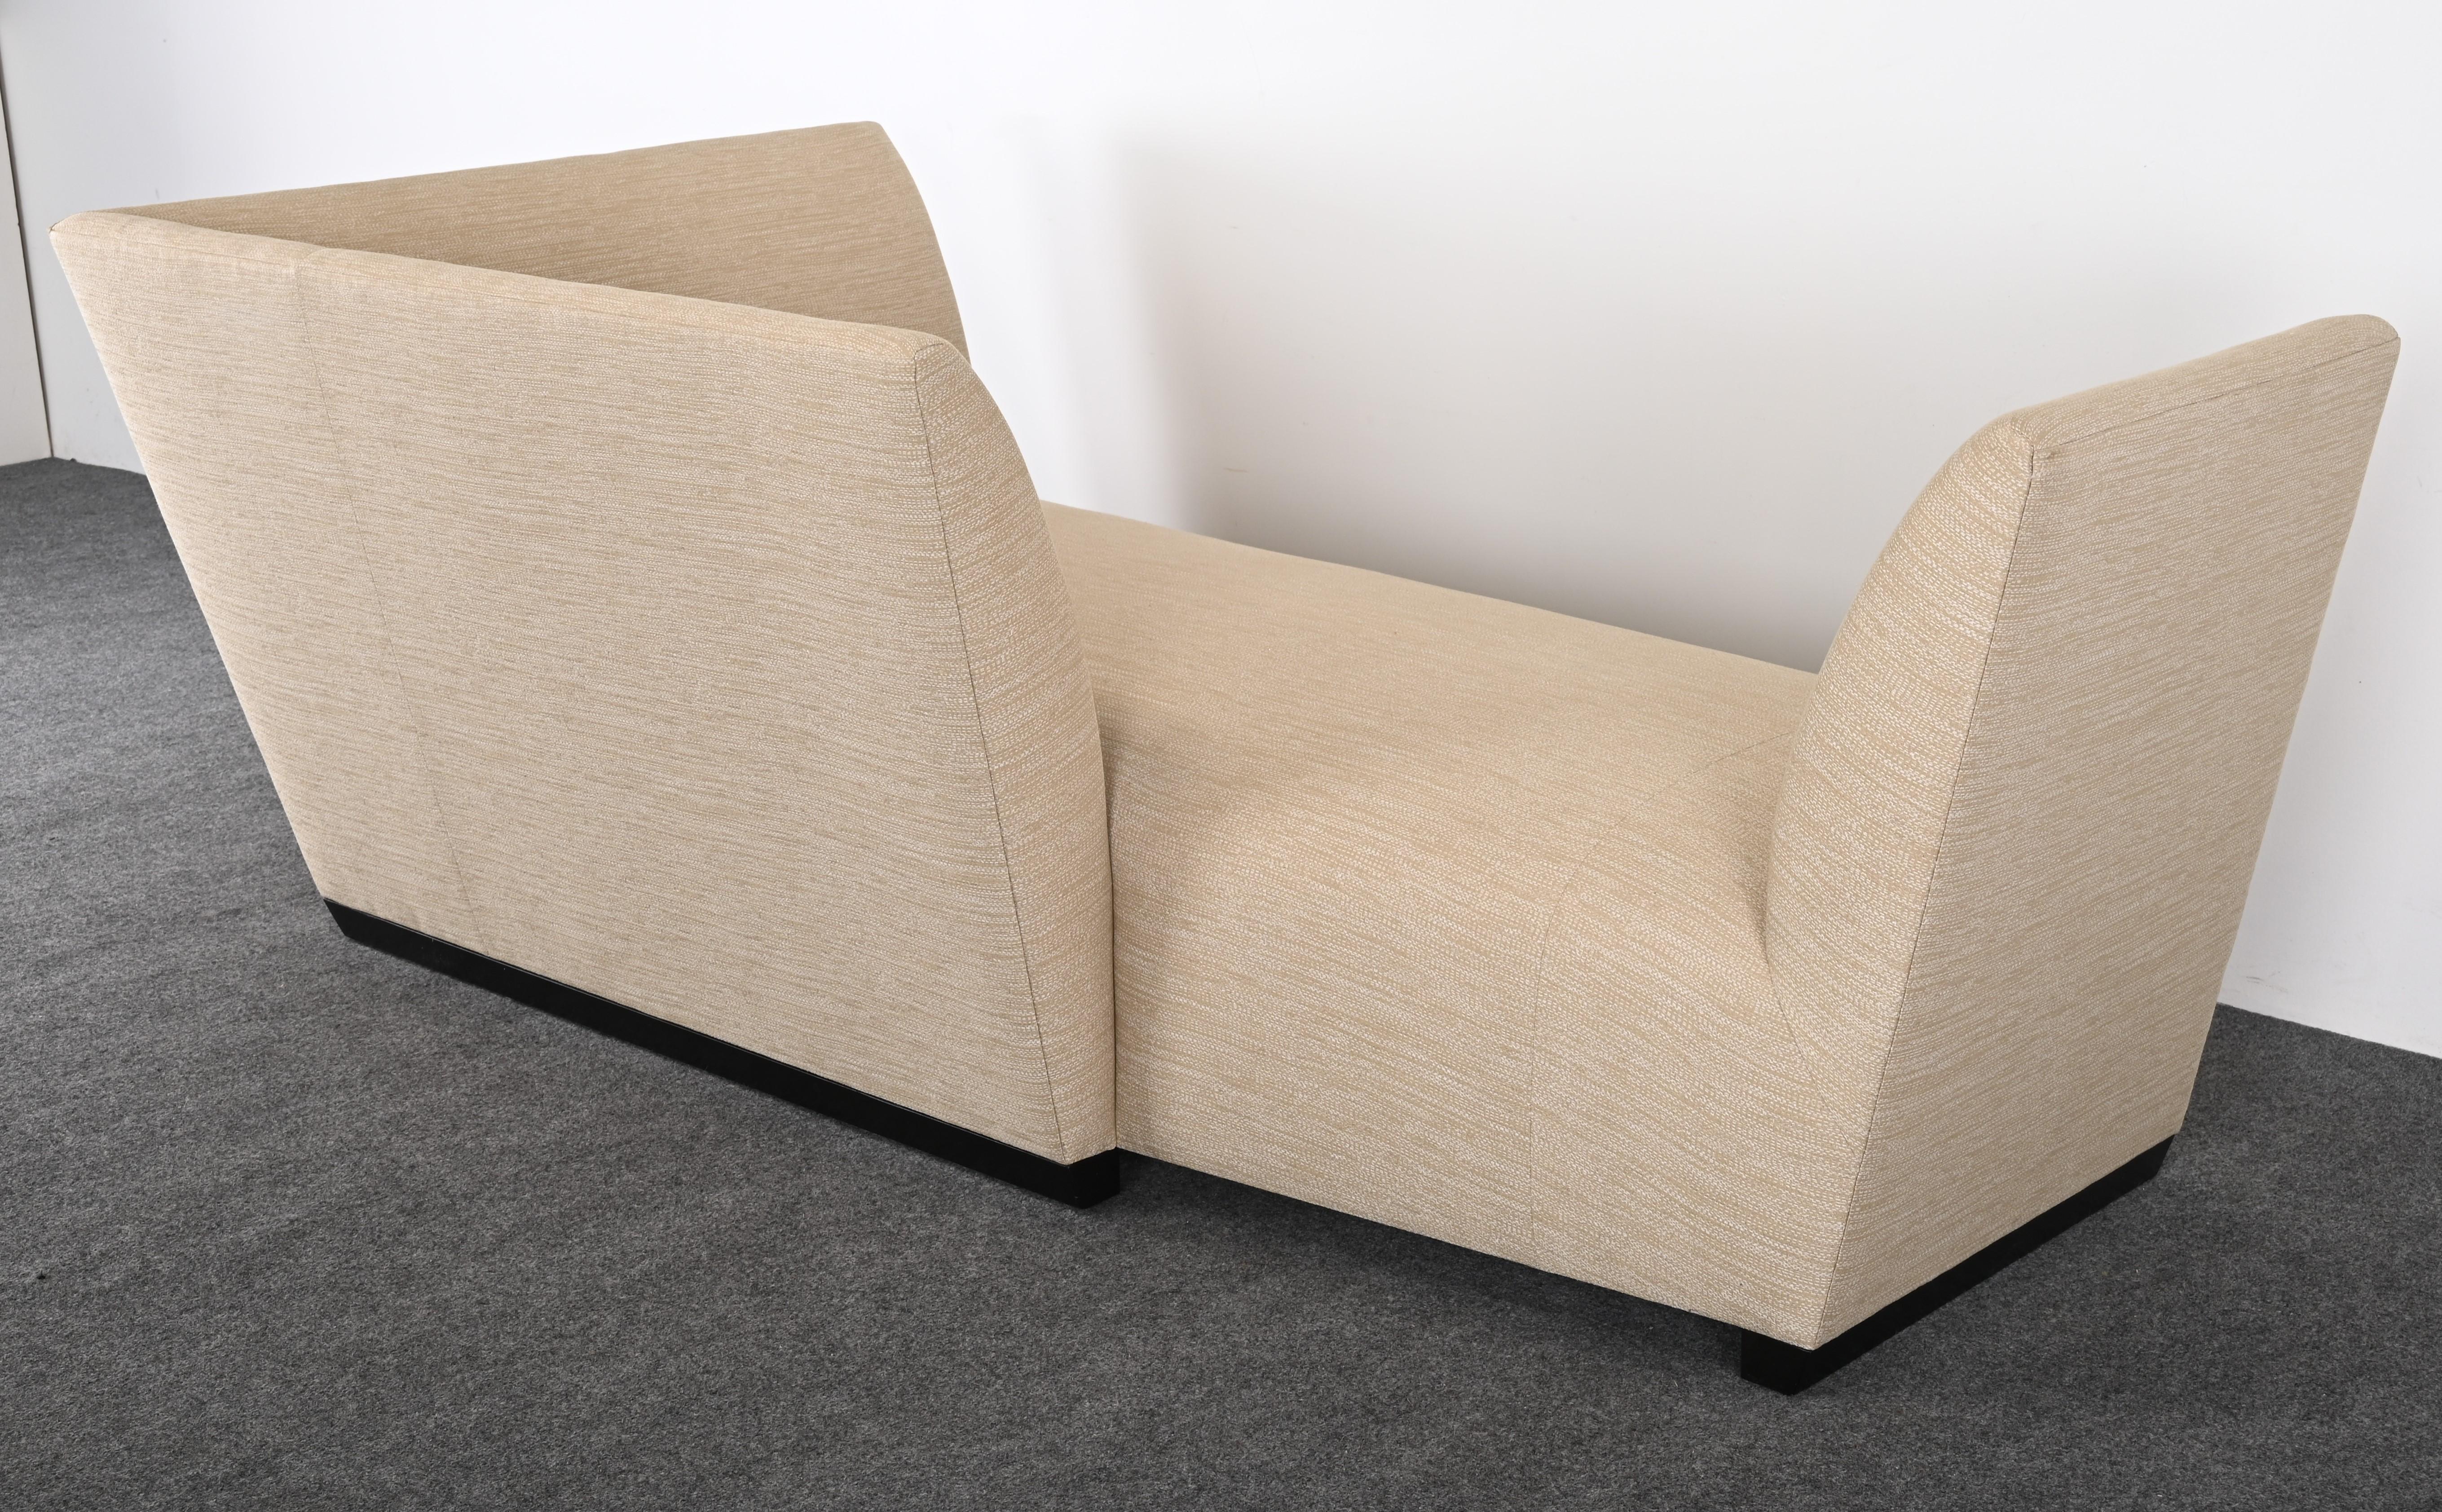 Island Sofa or Chaise Lounge by Joe D'Urso for Donghia, 1990s For Sale 12